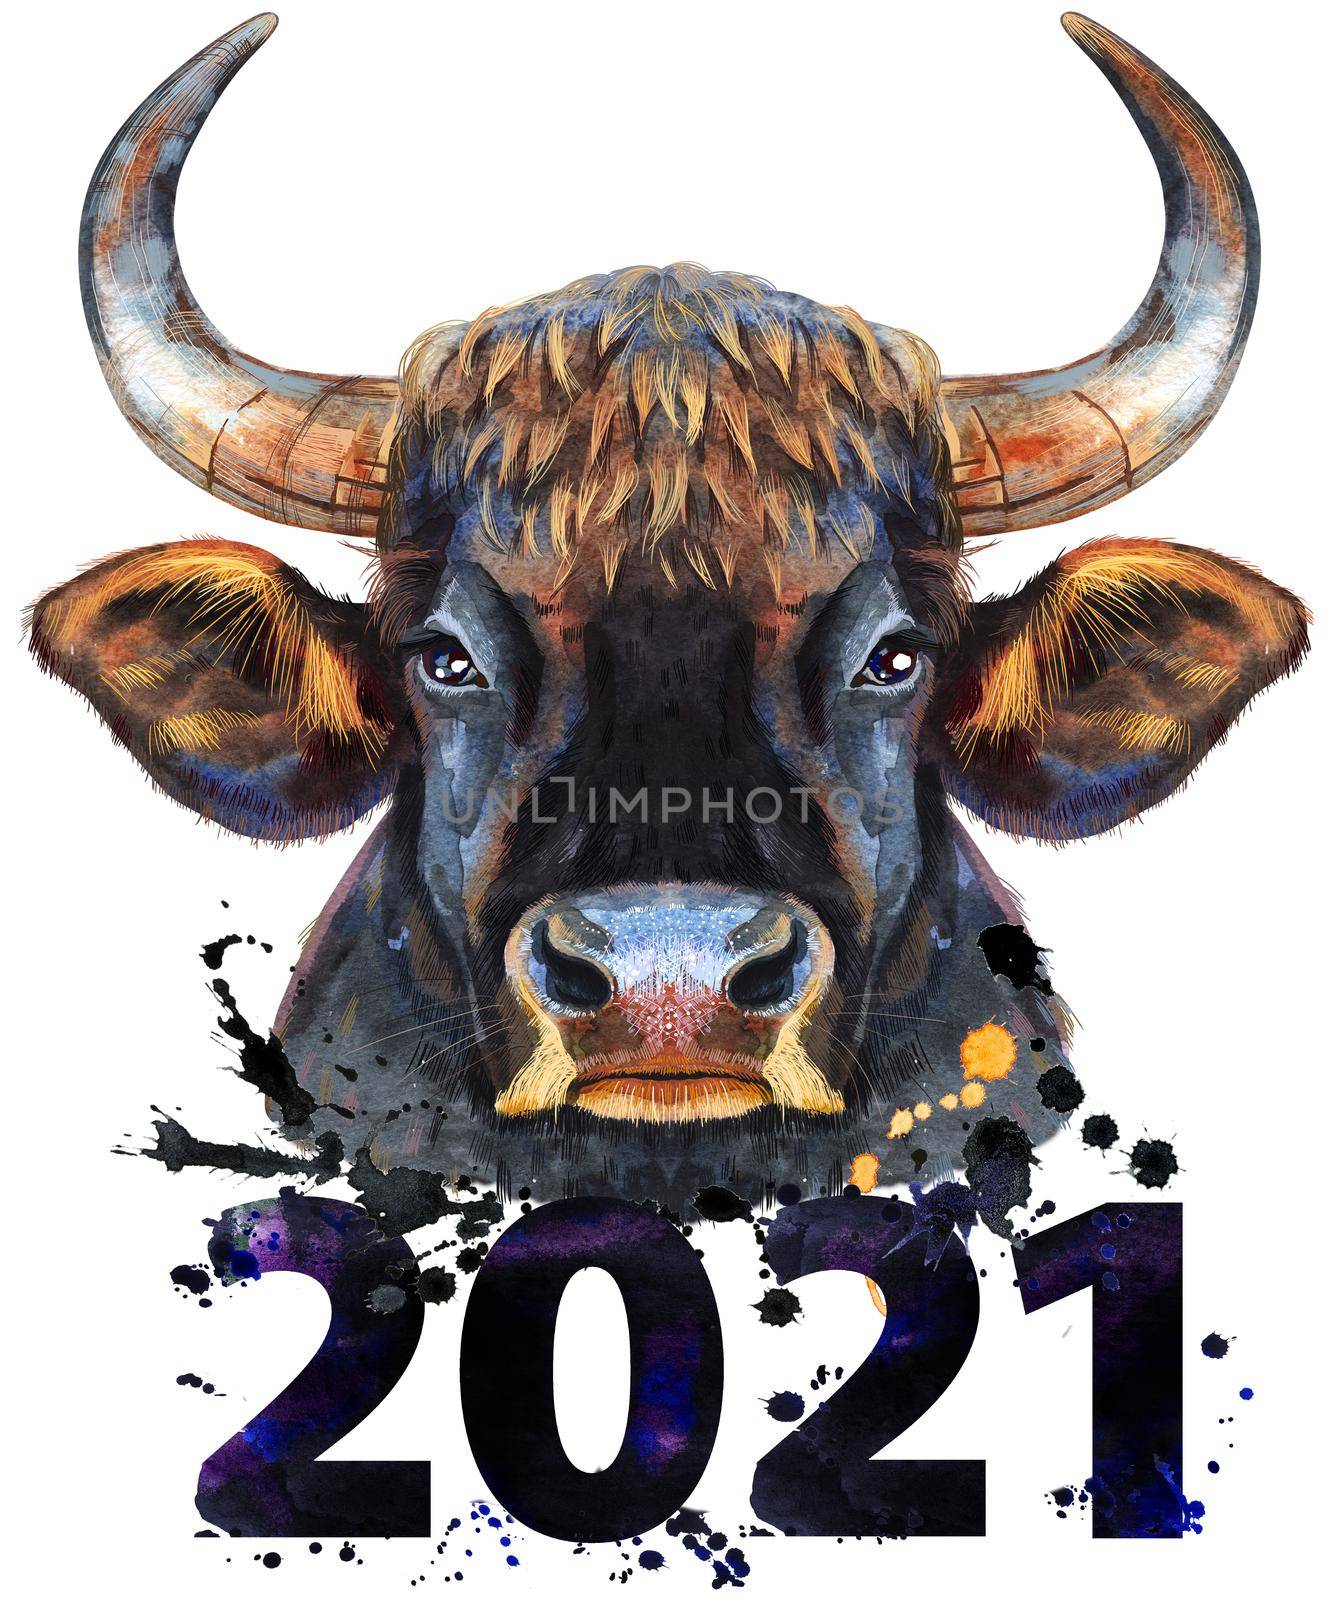 Black powerful bull with number 2021 watercolor graphics. Bull animal illustration with splash watercolor textured background.